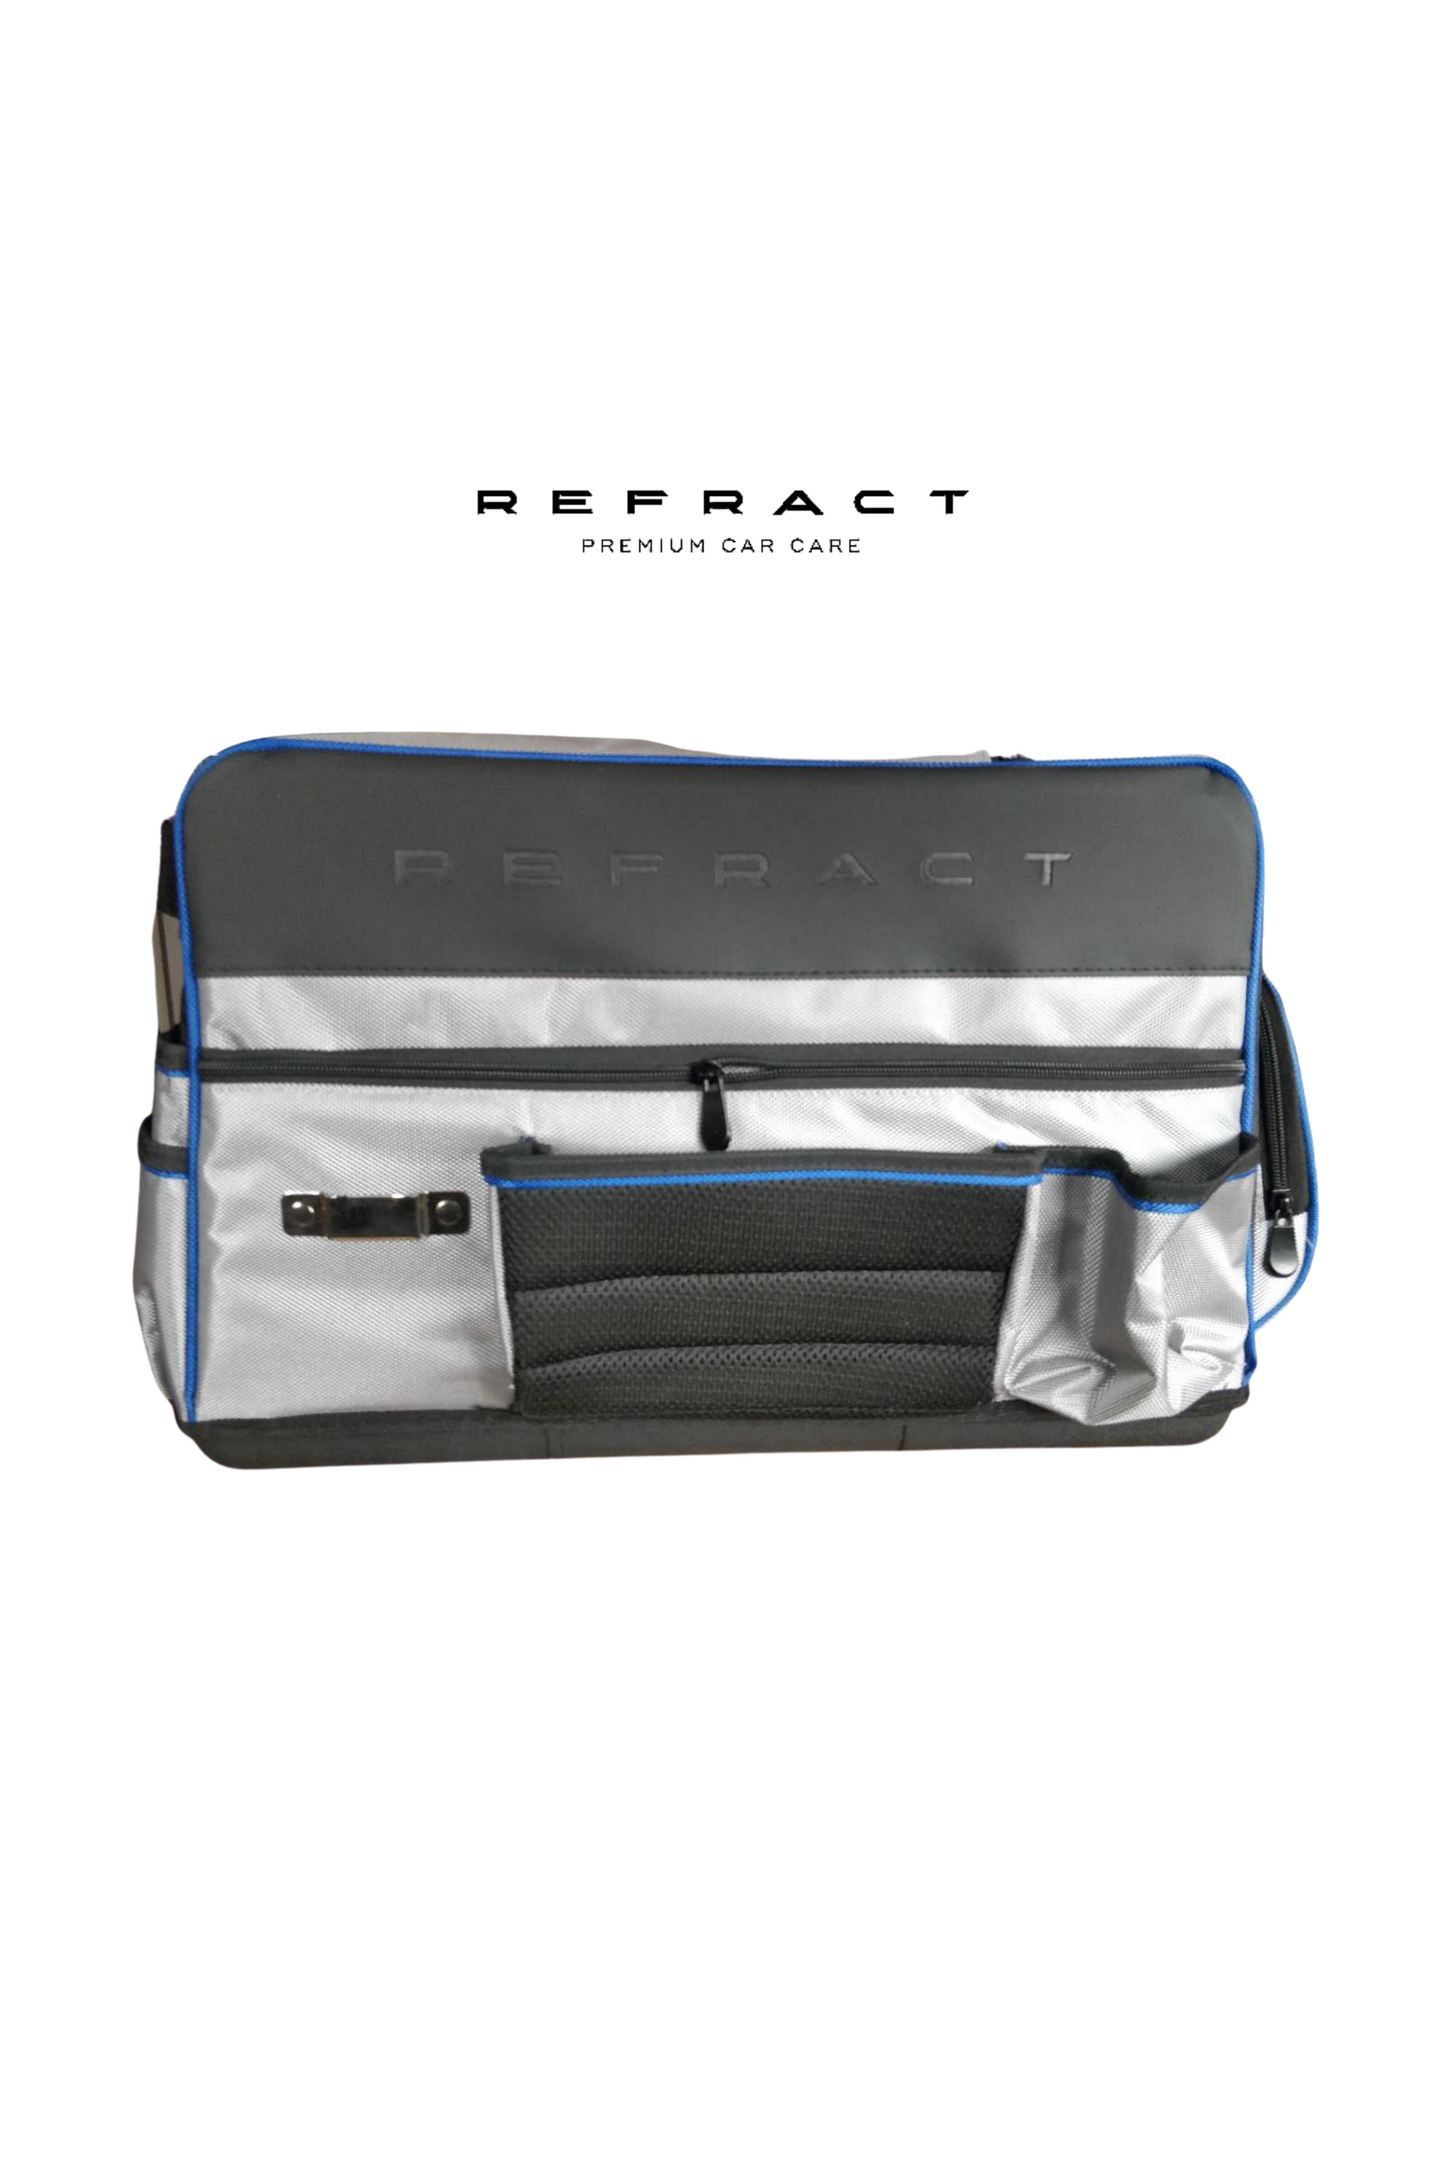 Refract Premium Car Care Products REFRACT Detailing Bag $89.95